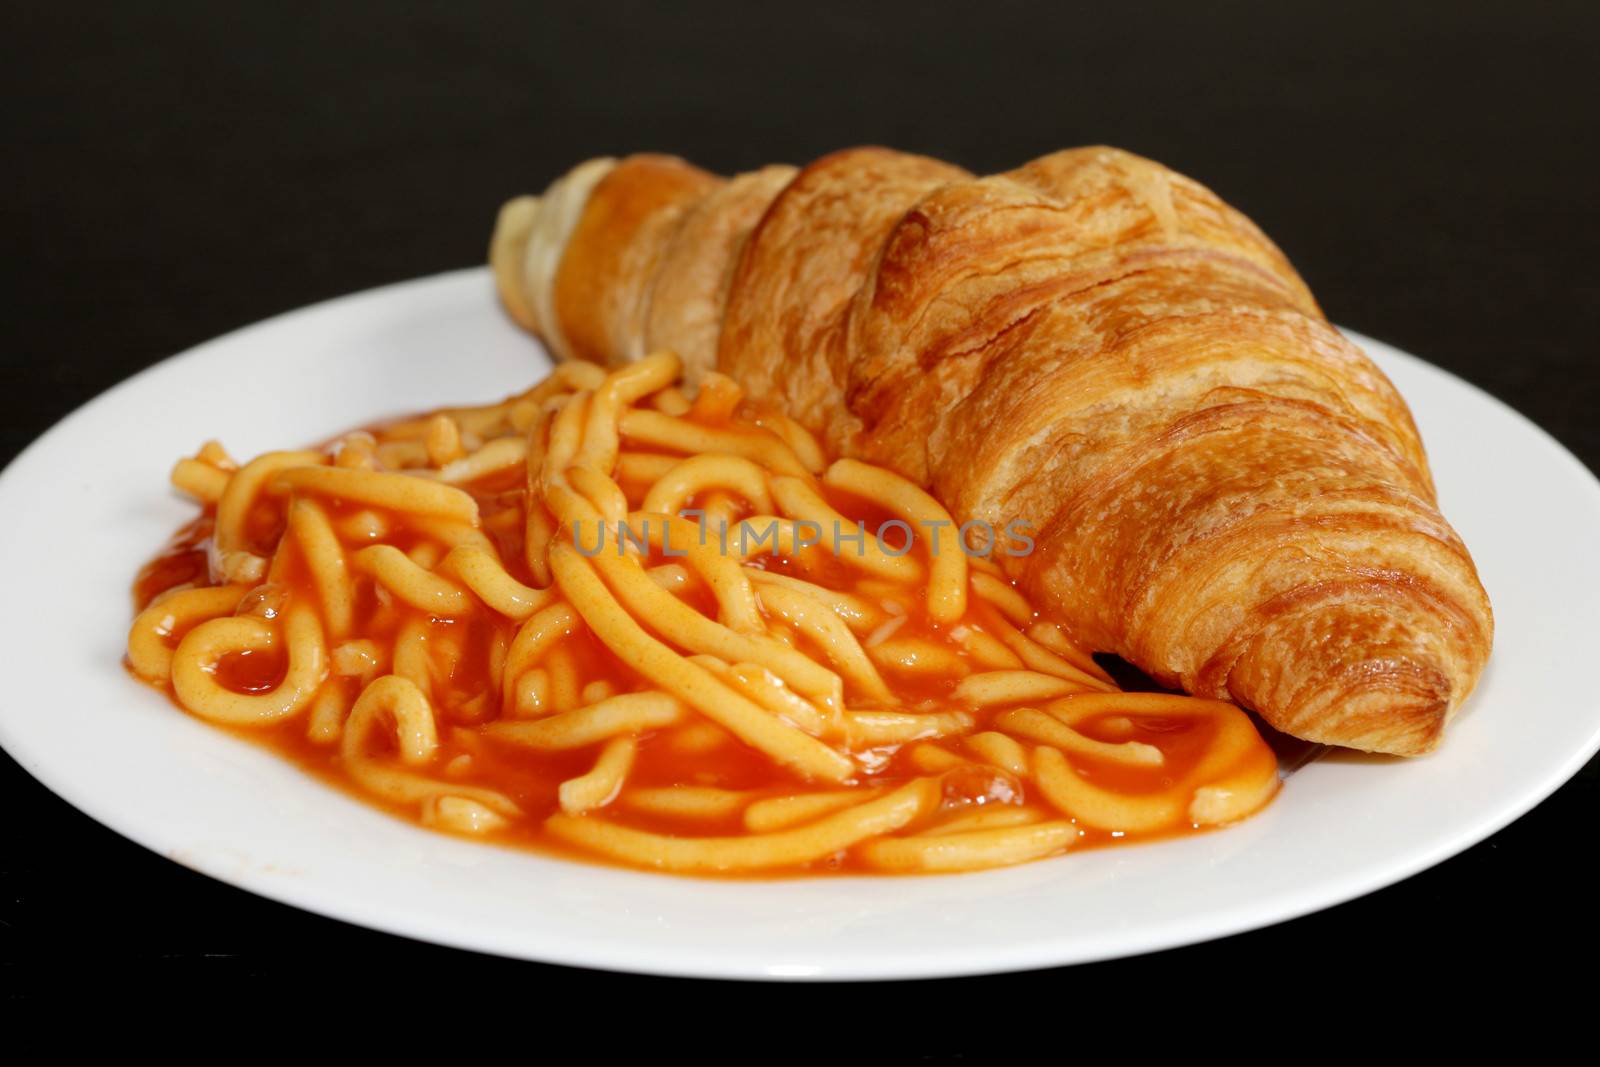 Croissant with Spaghetti